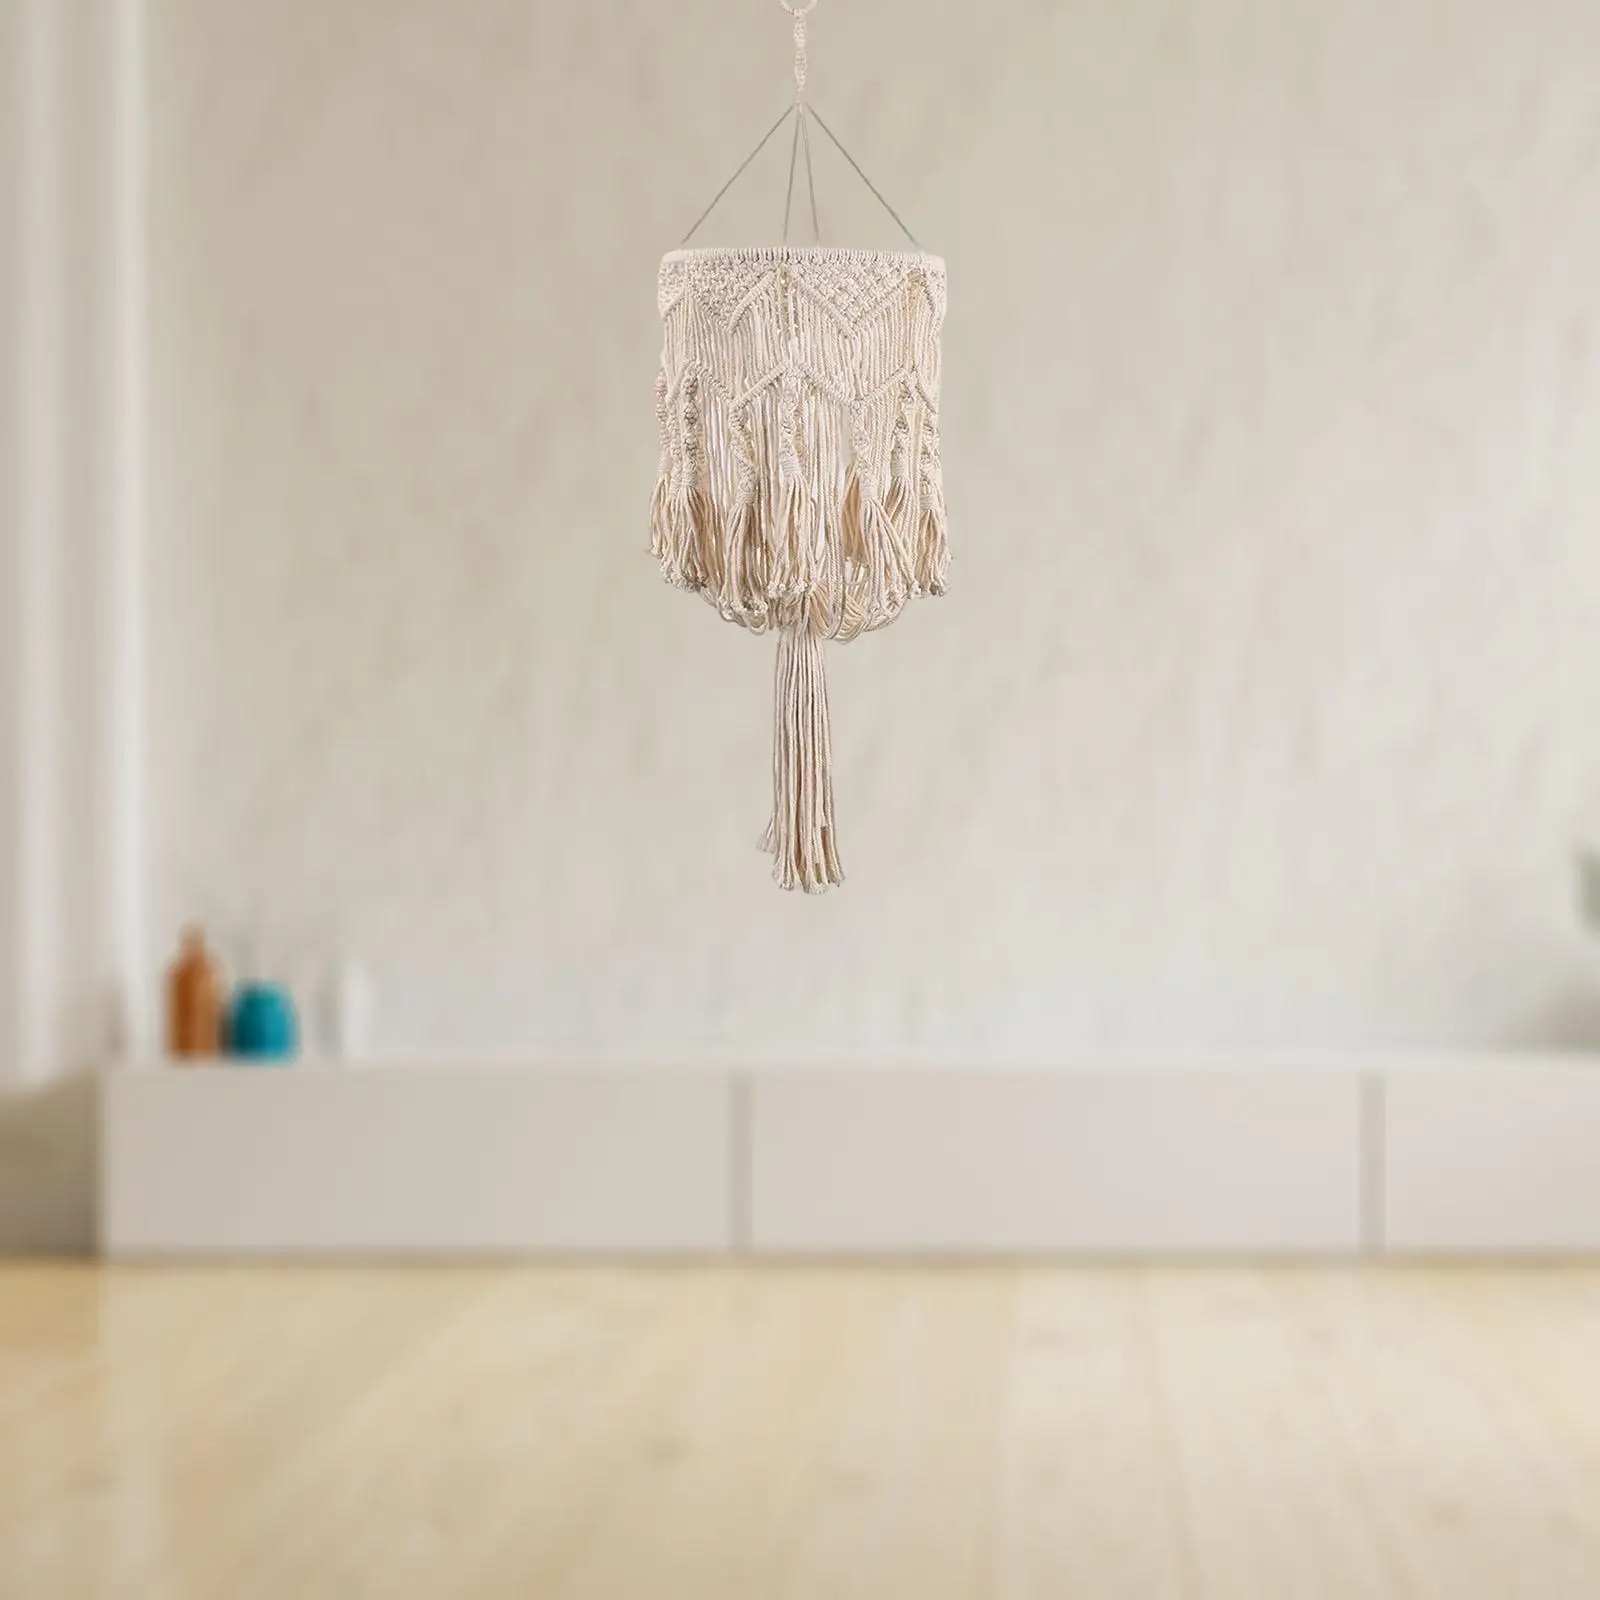 Nordic Macrame Lamp Shade Ceiling Light Cover Bohemian Hand Woven Hanging Lampshade for Living Room Nursery Bedroom Home Decor